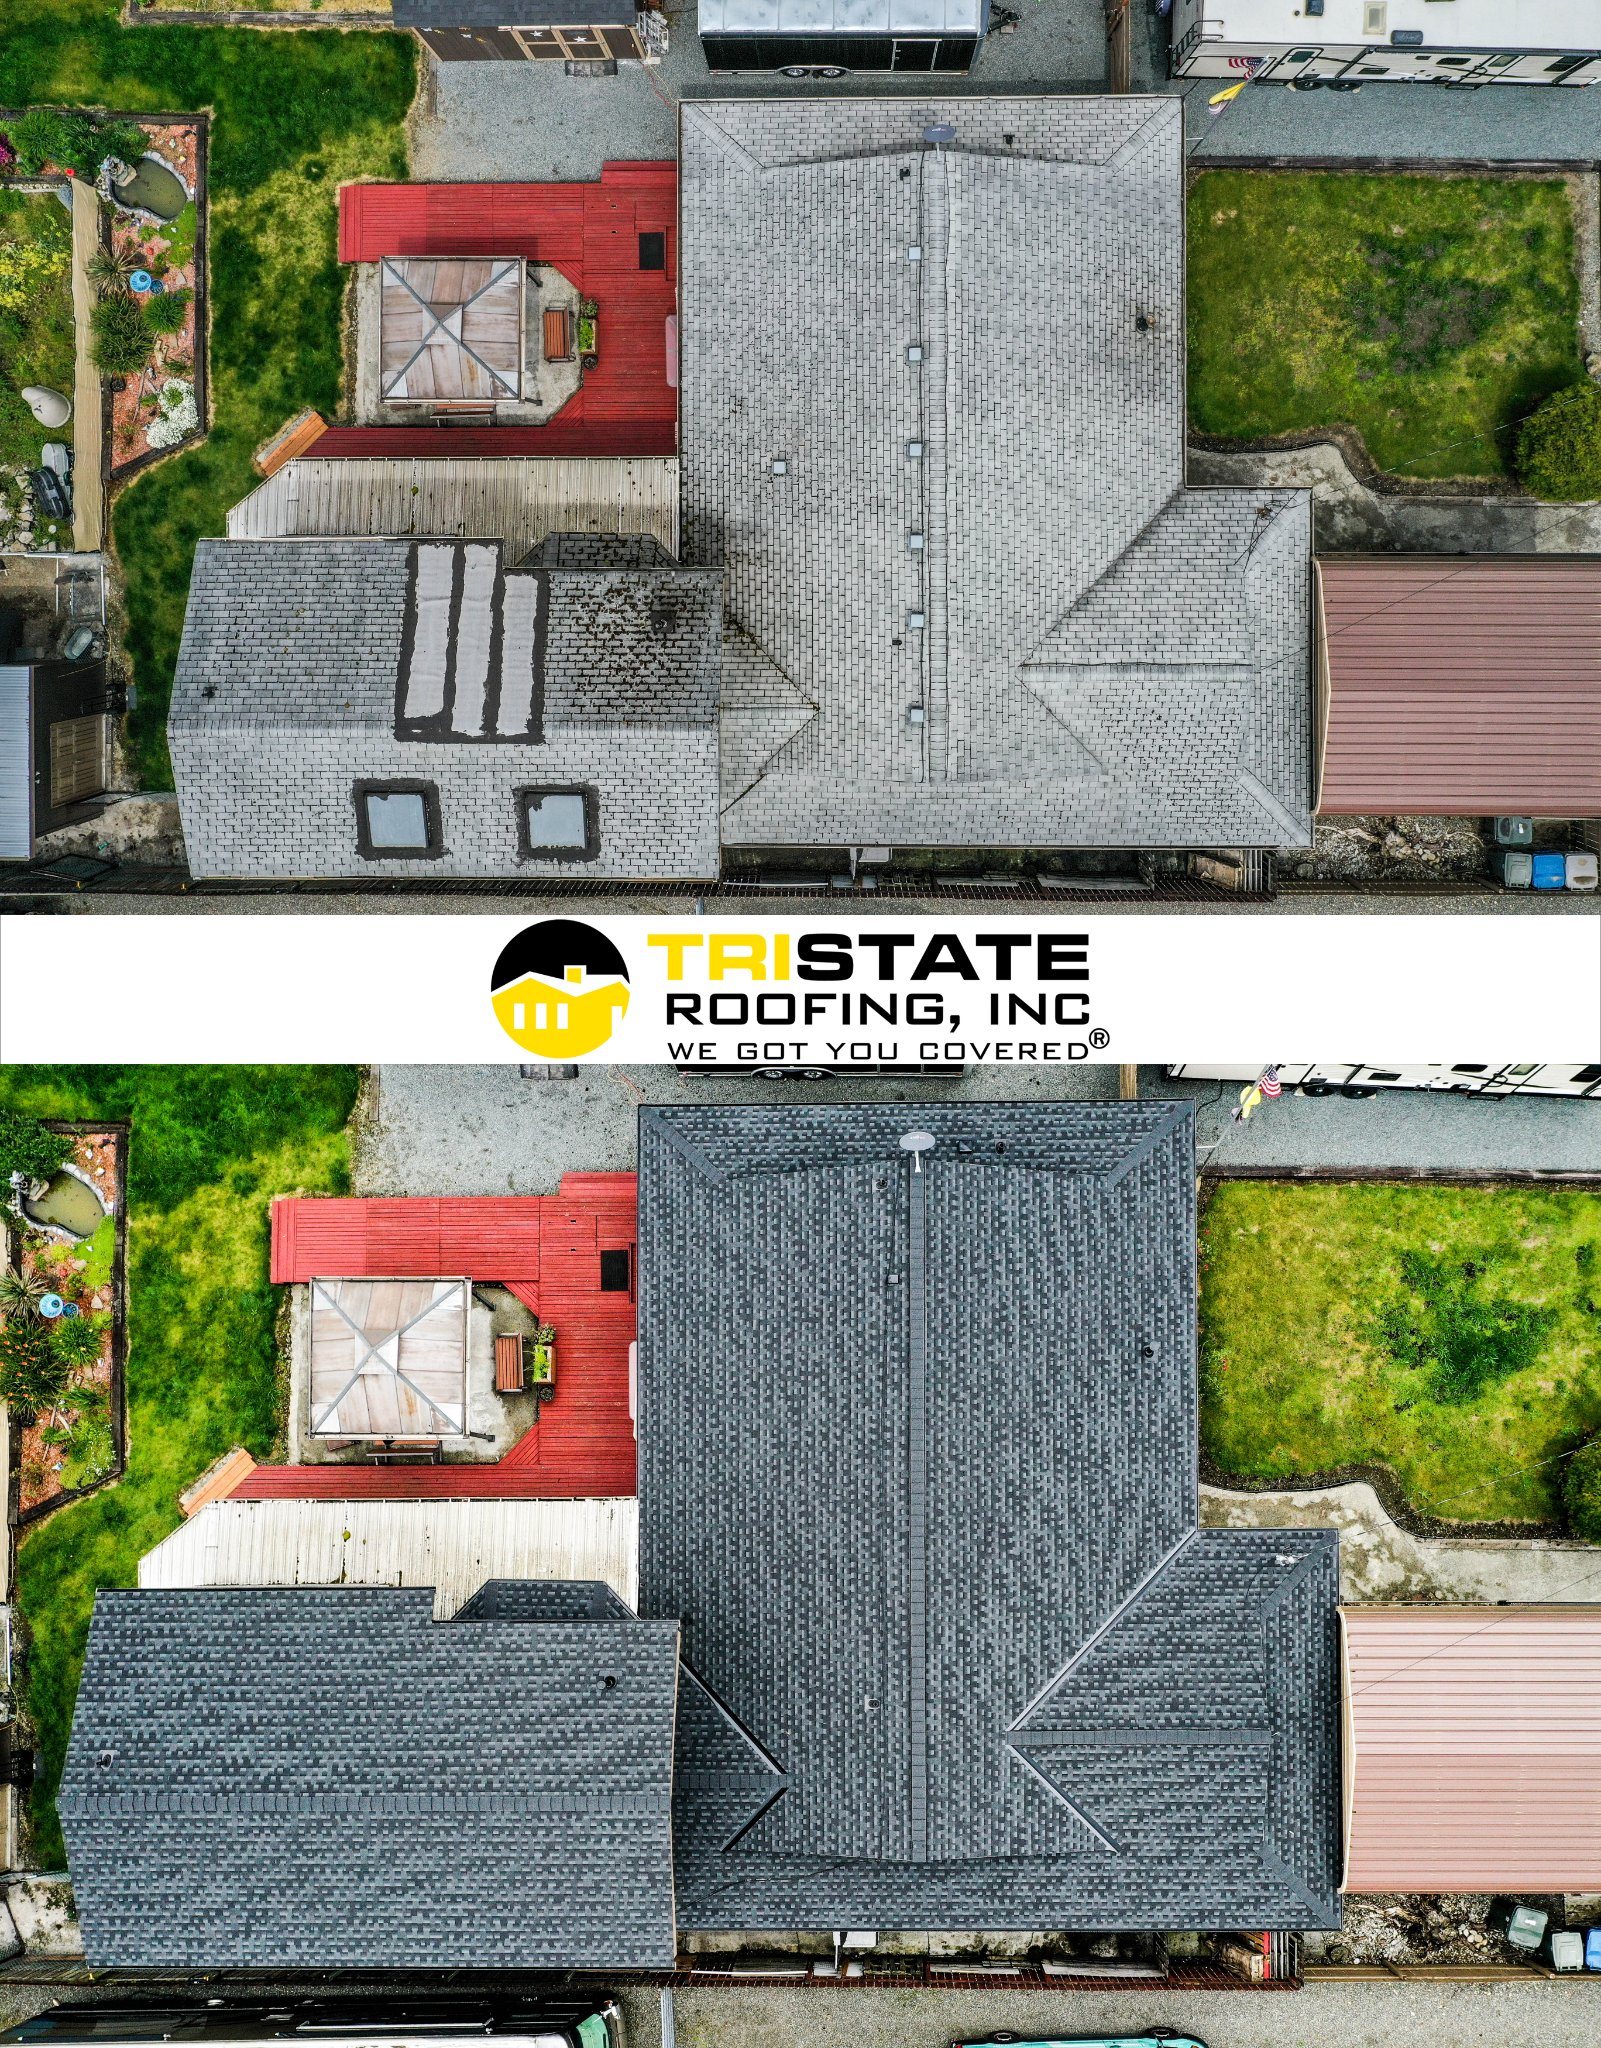 TriState Roofing, Inc.